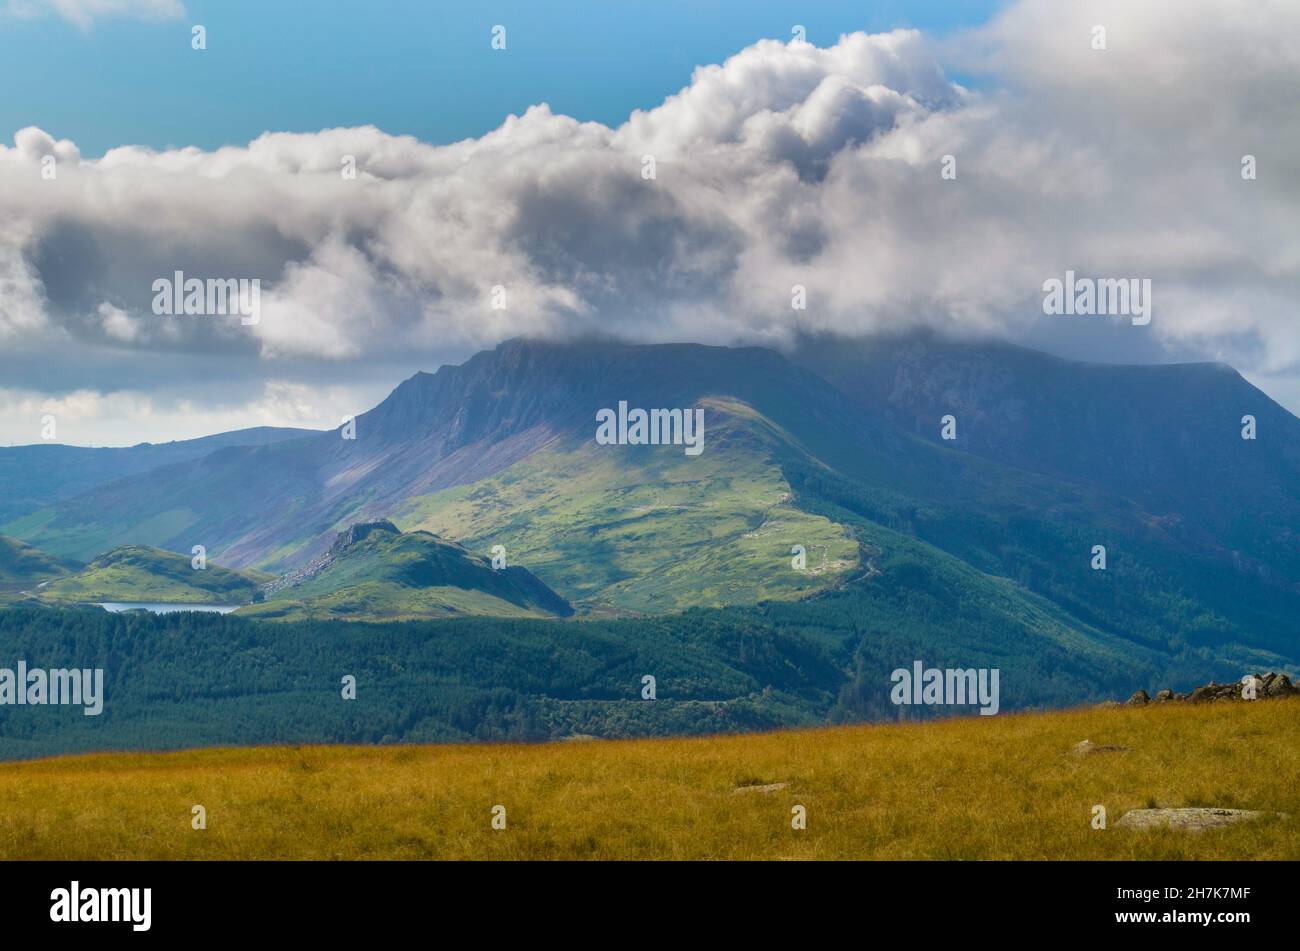 Mynydd Mawr, a mountain in Snowdonia, Wales, UK photographed in late Summer Stock Photo